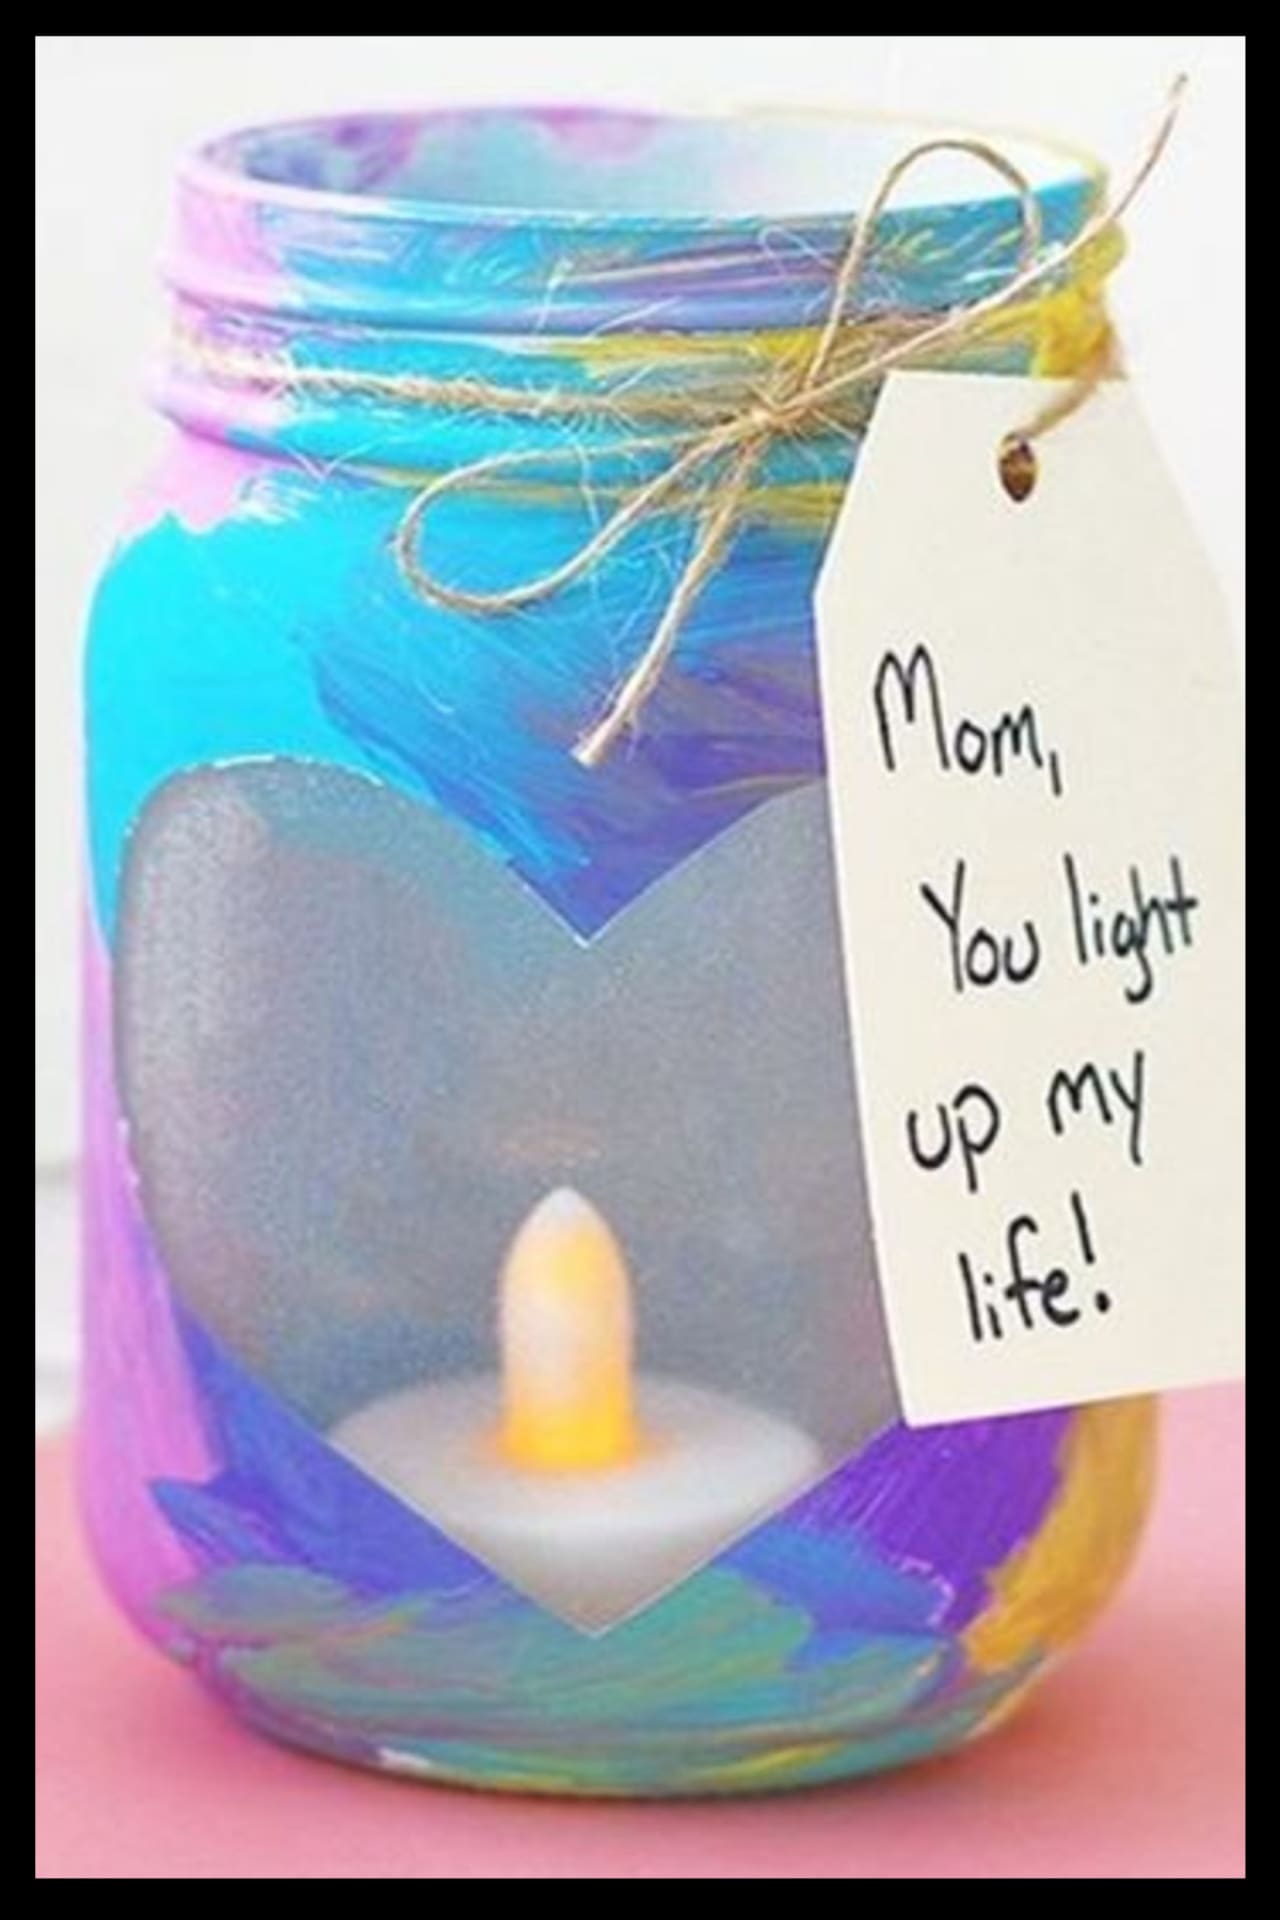 DIY gifts for mom kids can make for homemade mothers day gifts or moms birthday - mason jar gift ideas -mason jar candle crafts